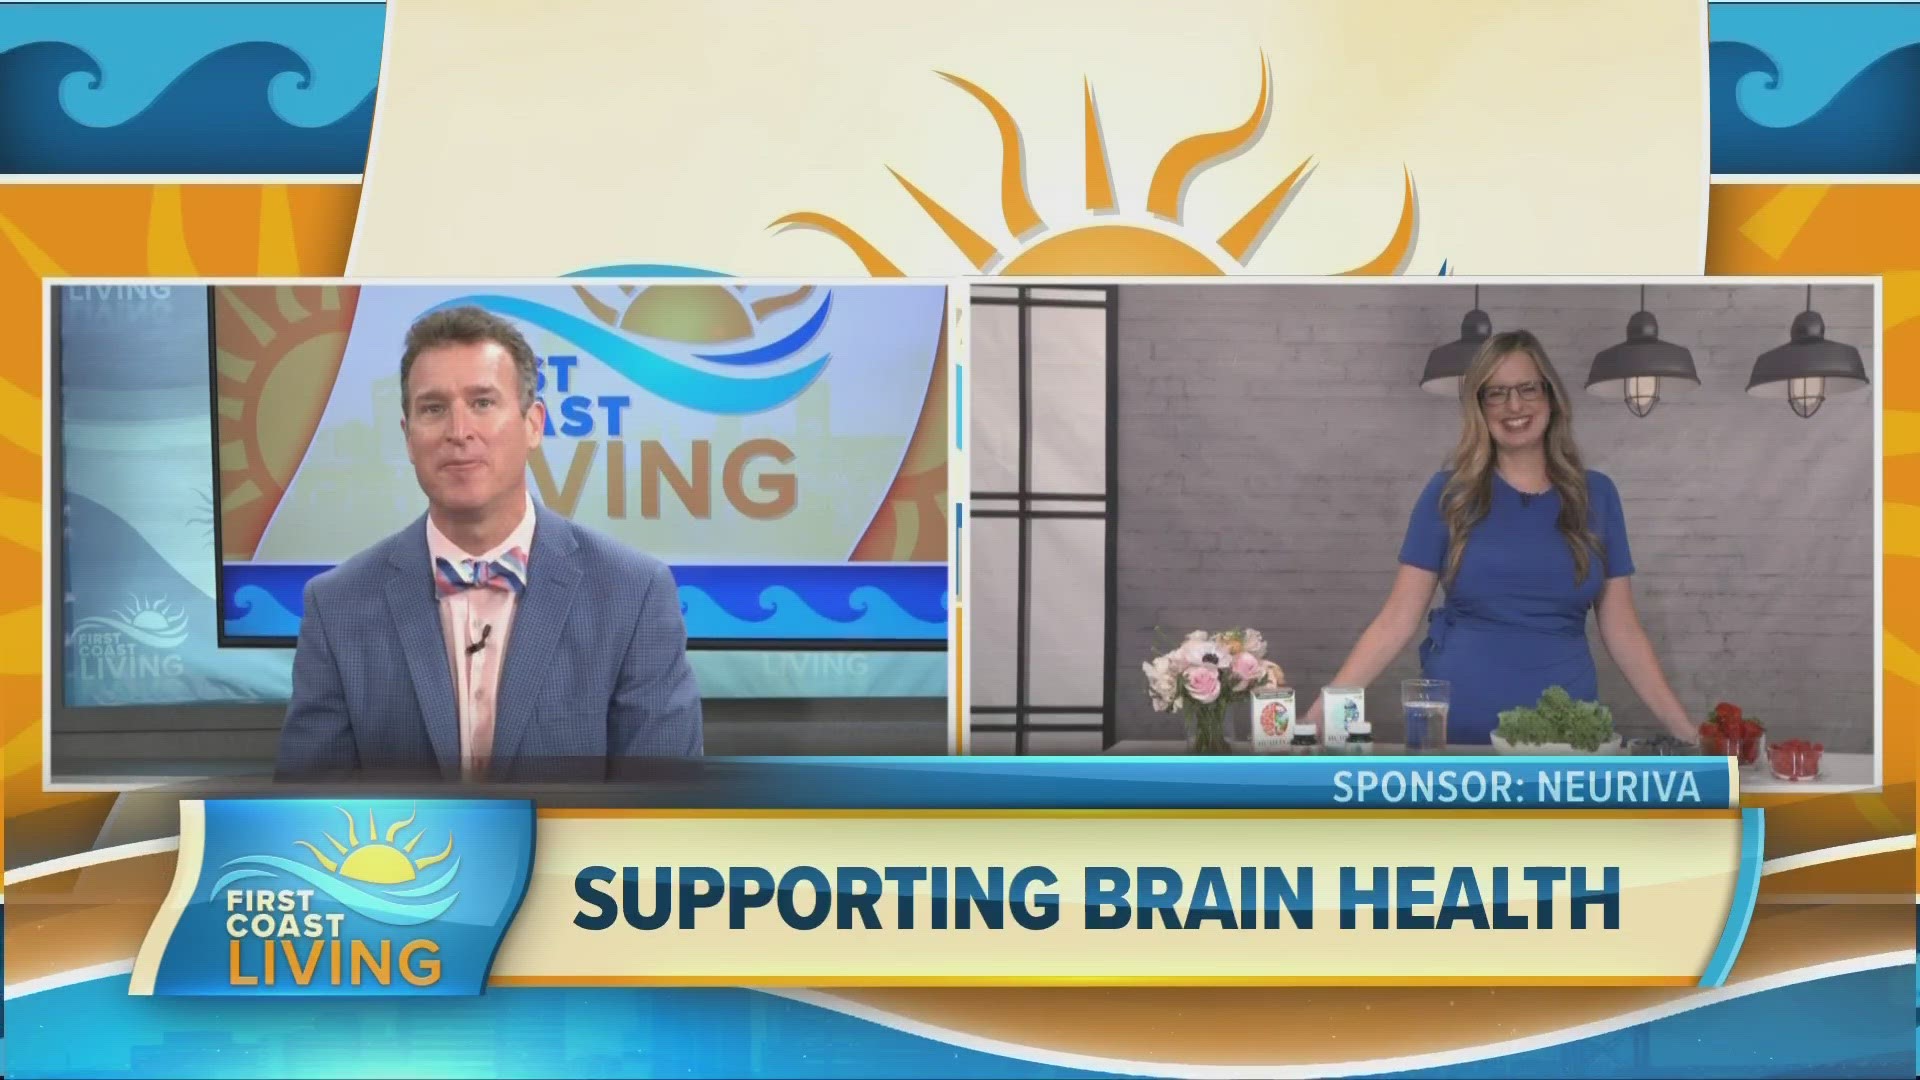 Dietitian, Nutrition Educator, and Brain Health Expert, Melissa Halas, joins us with strategies you can add to your daily routine to support brain health.